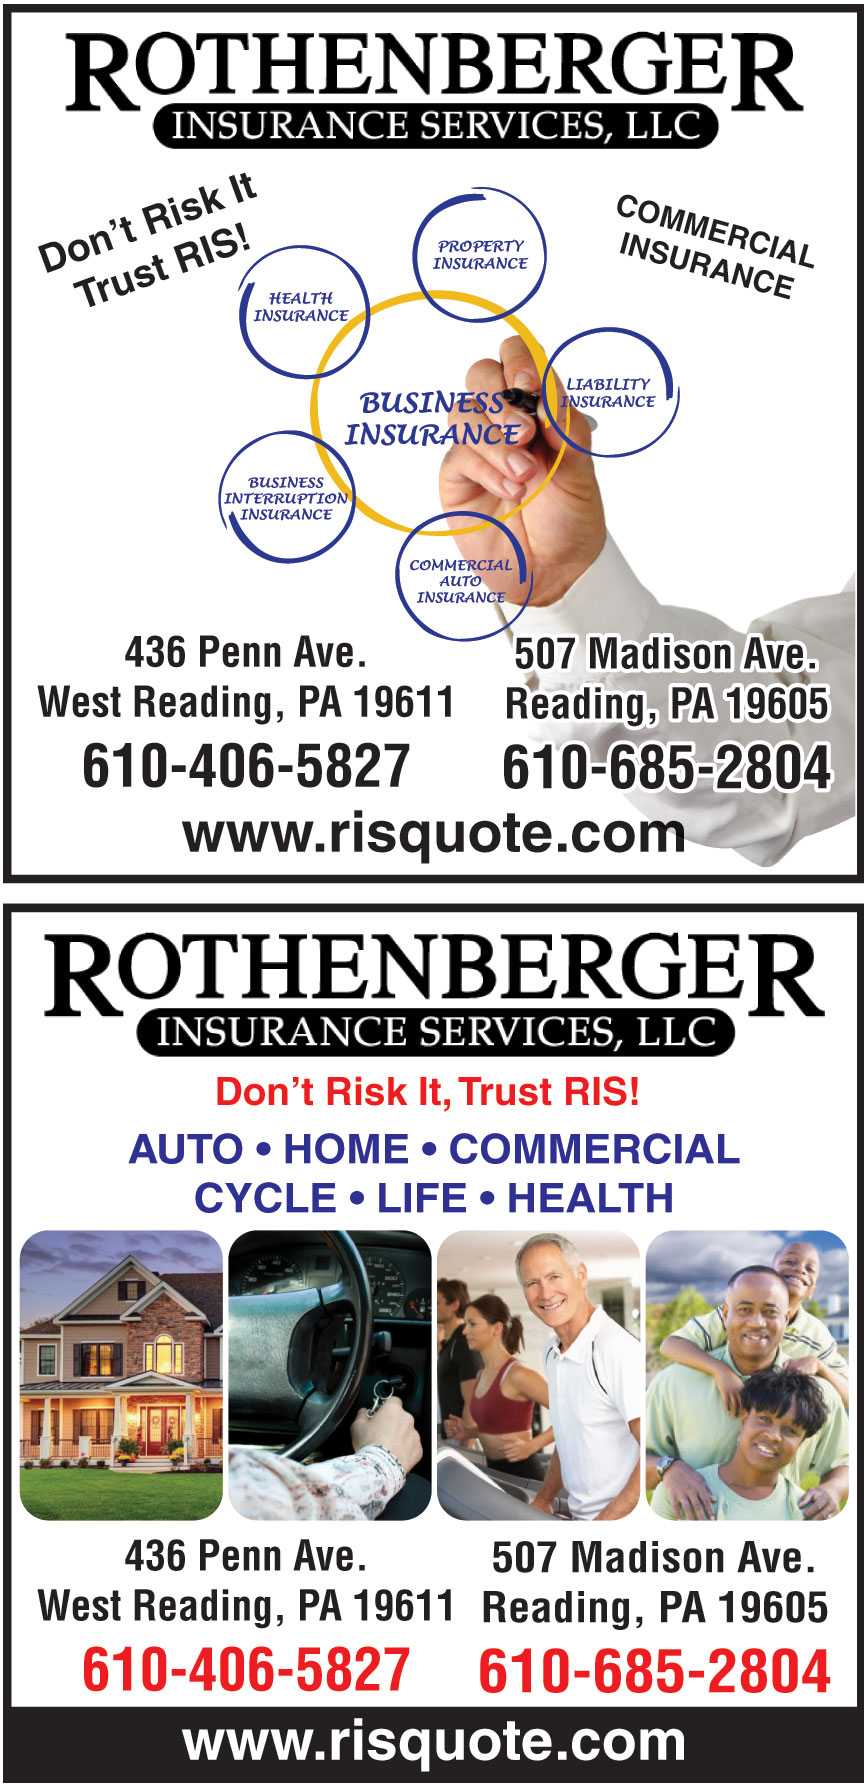 ROTHENBERGER INSURANCE